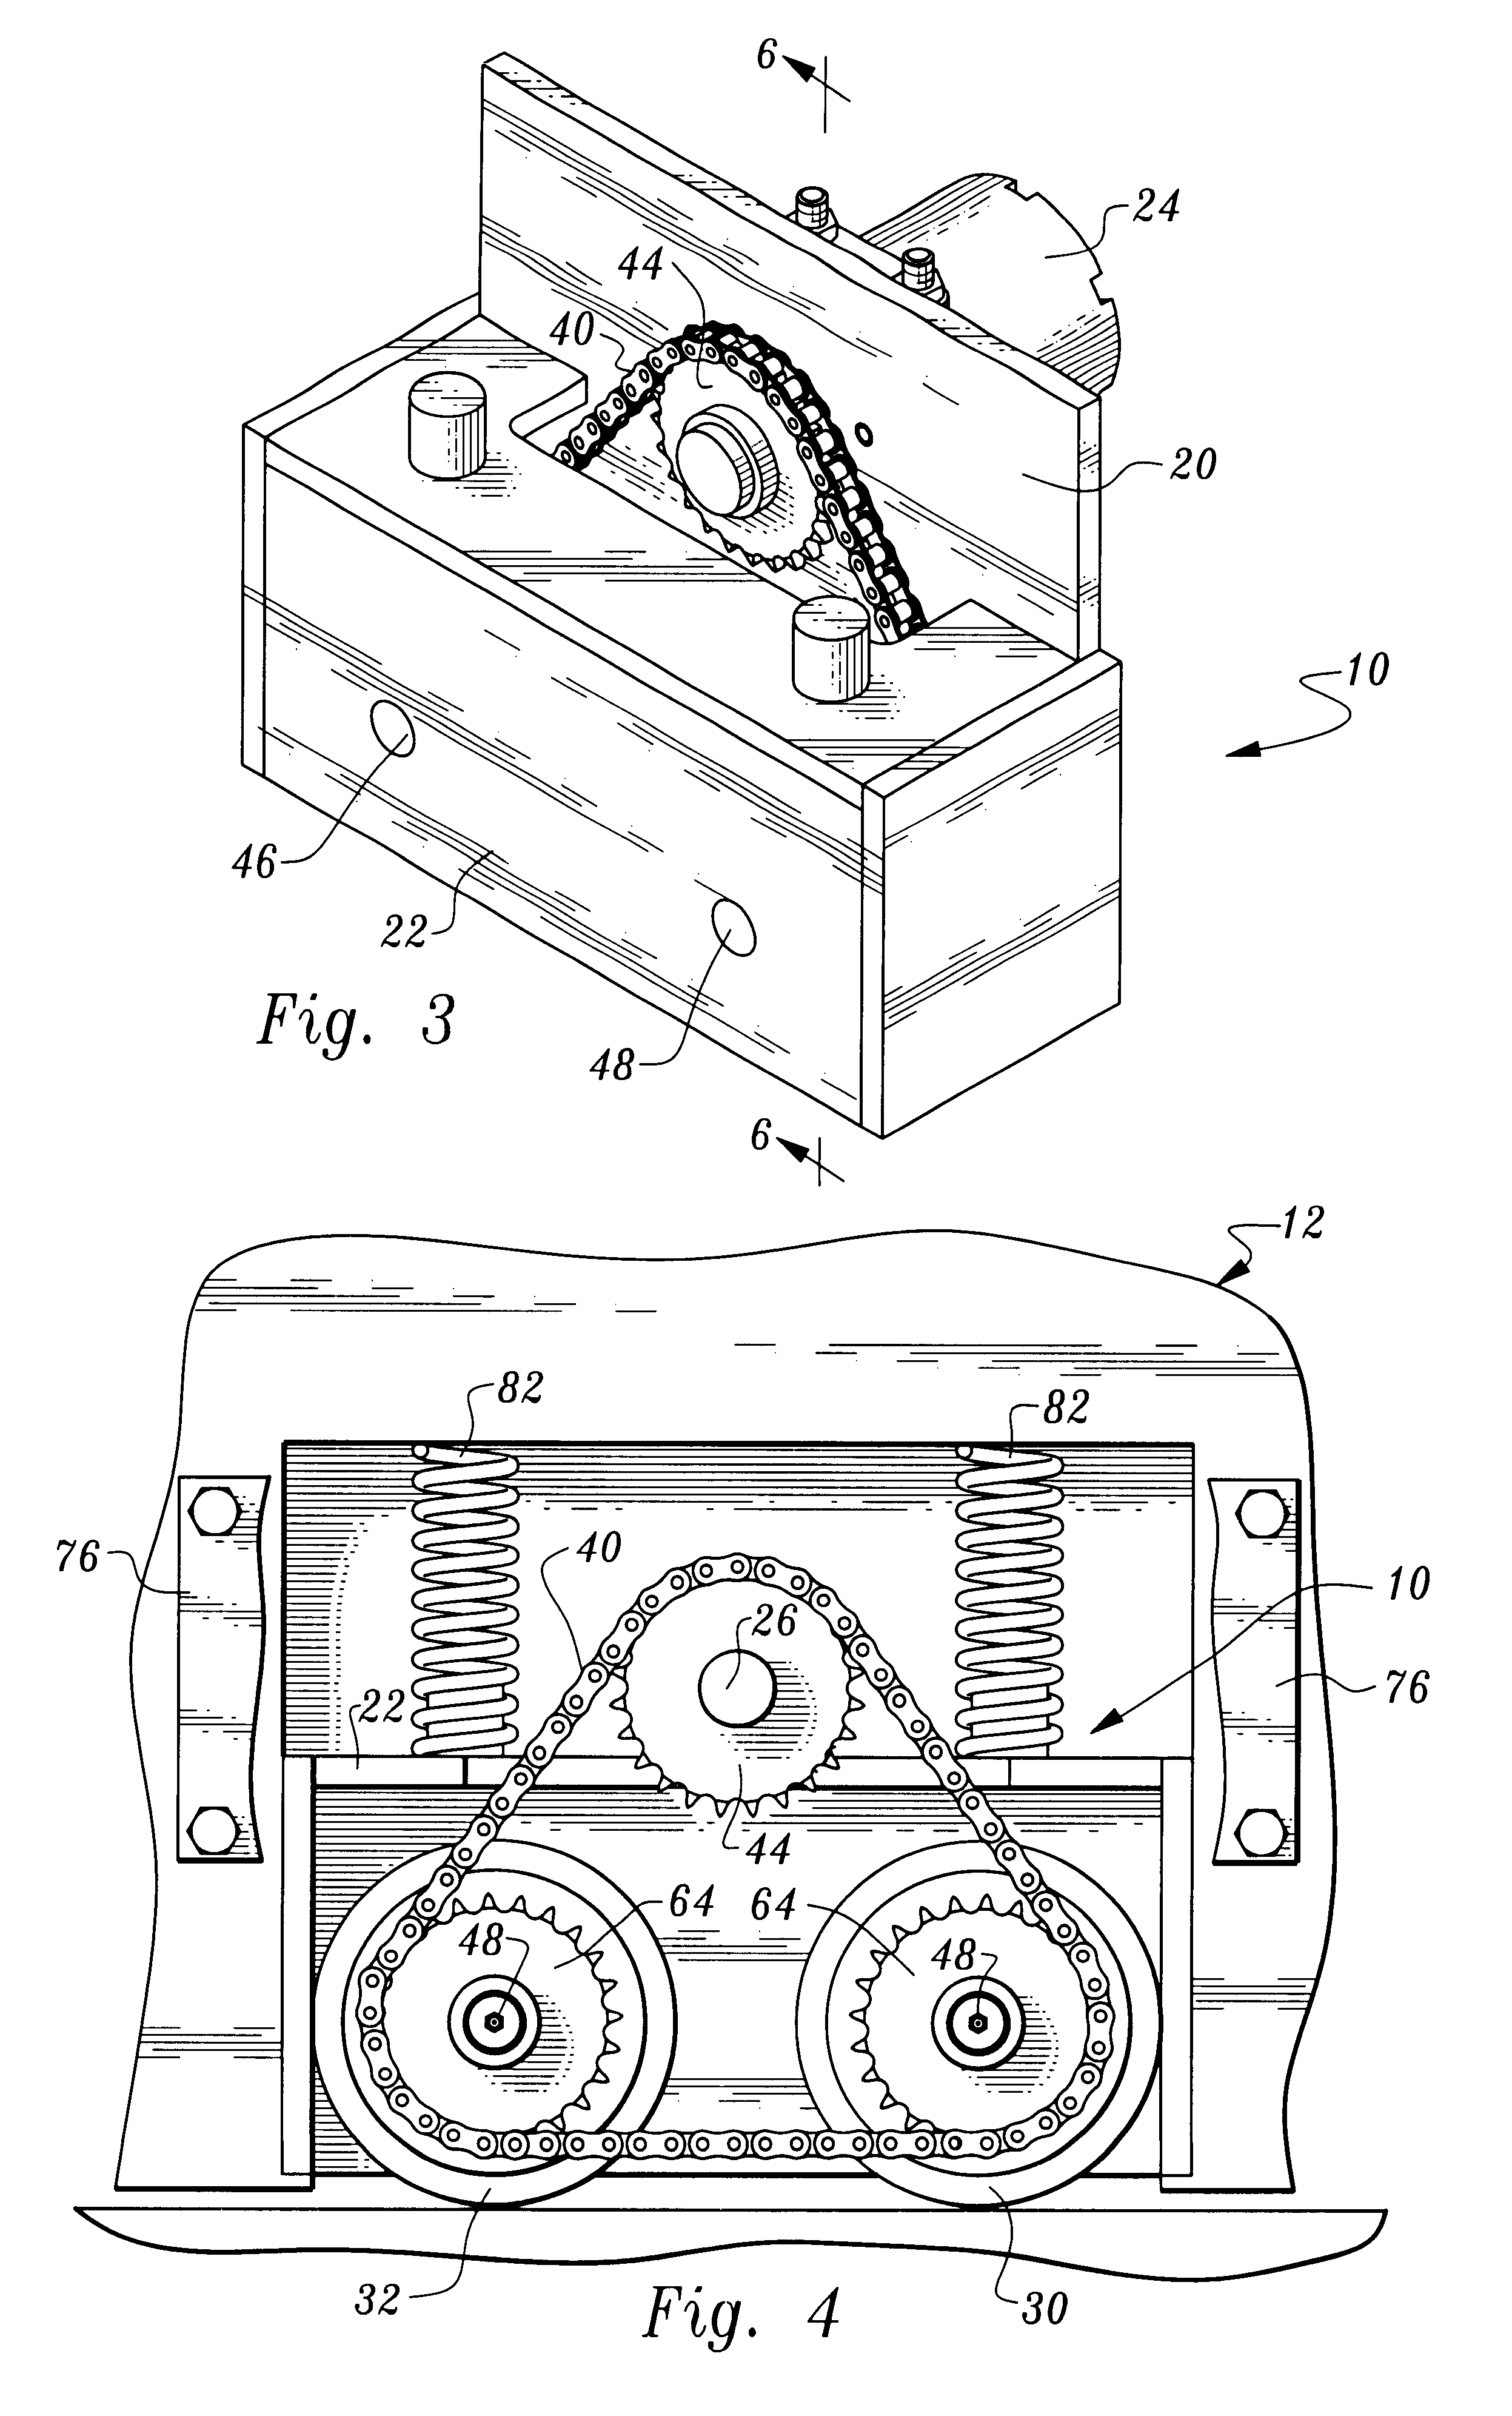 Apparatus for moving earth boring machines